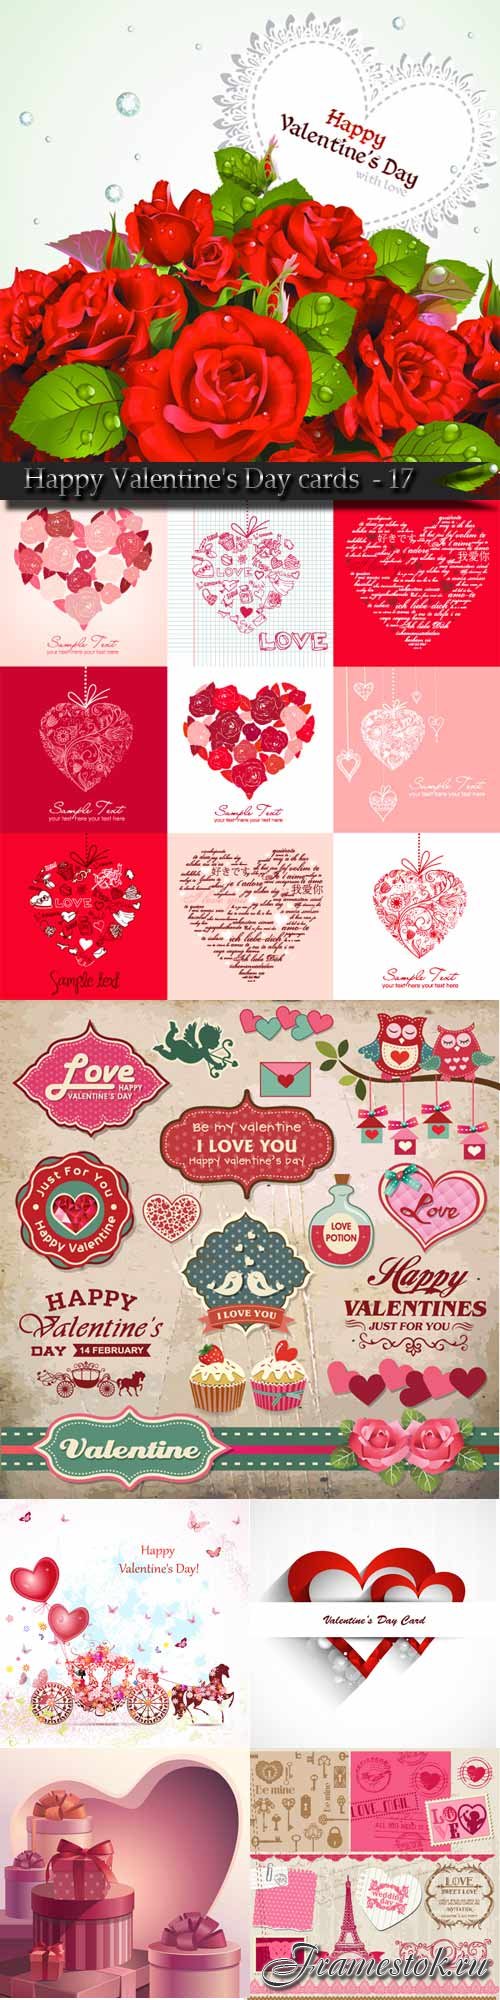 Happy Valentine's Day cards and backgrounds - 17